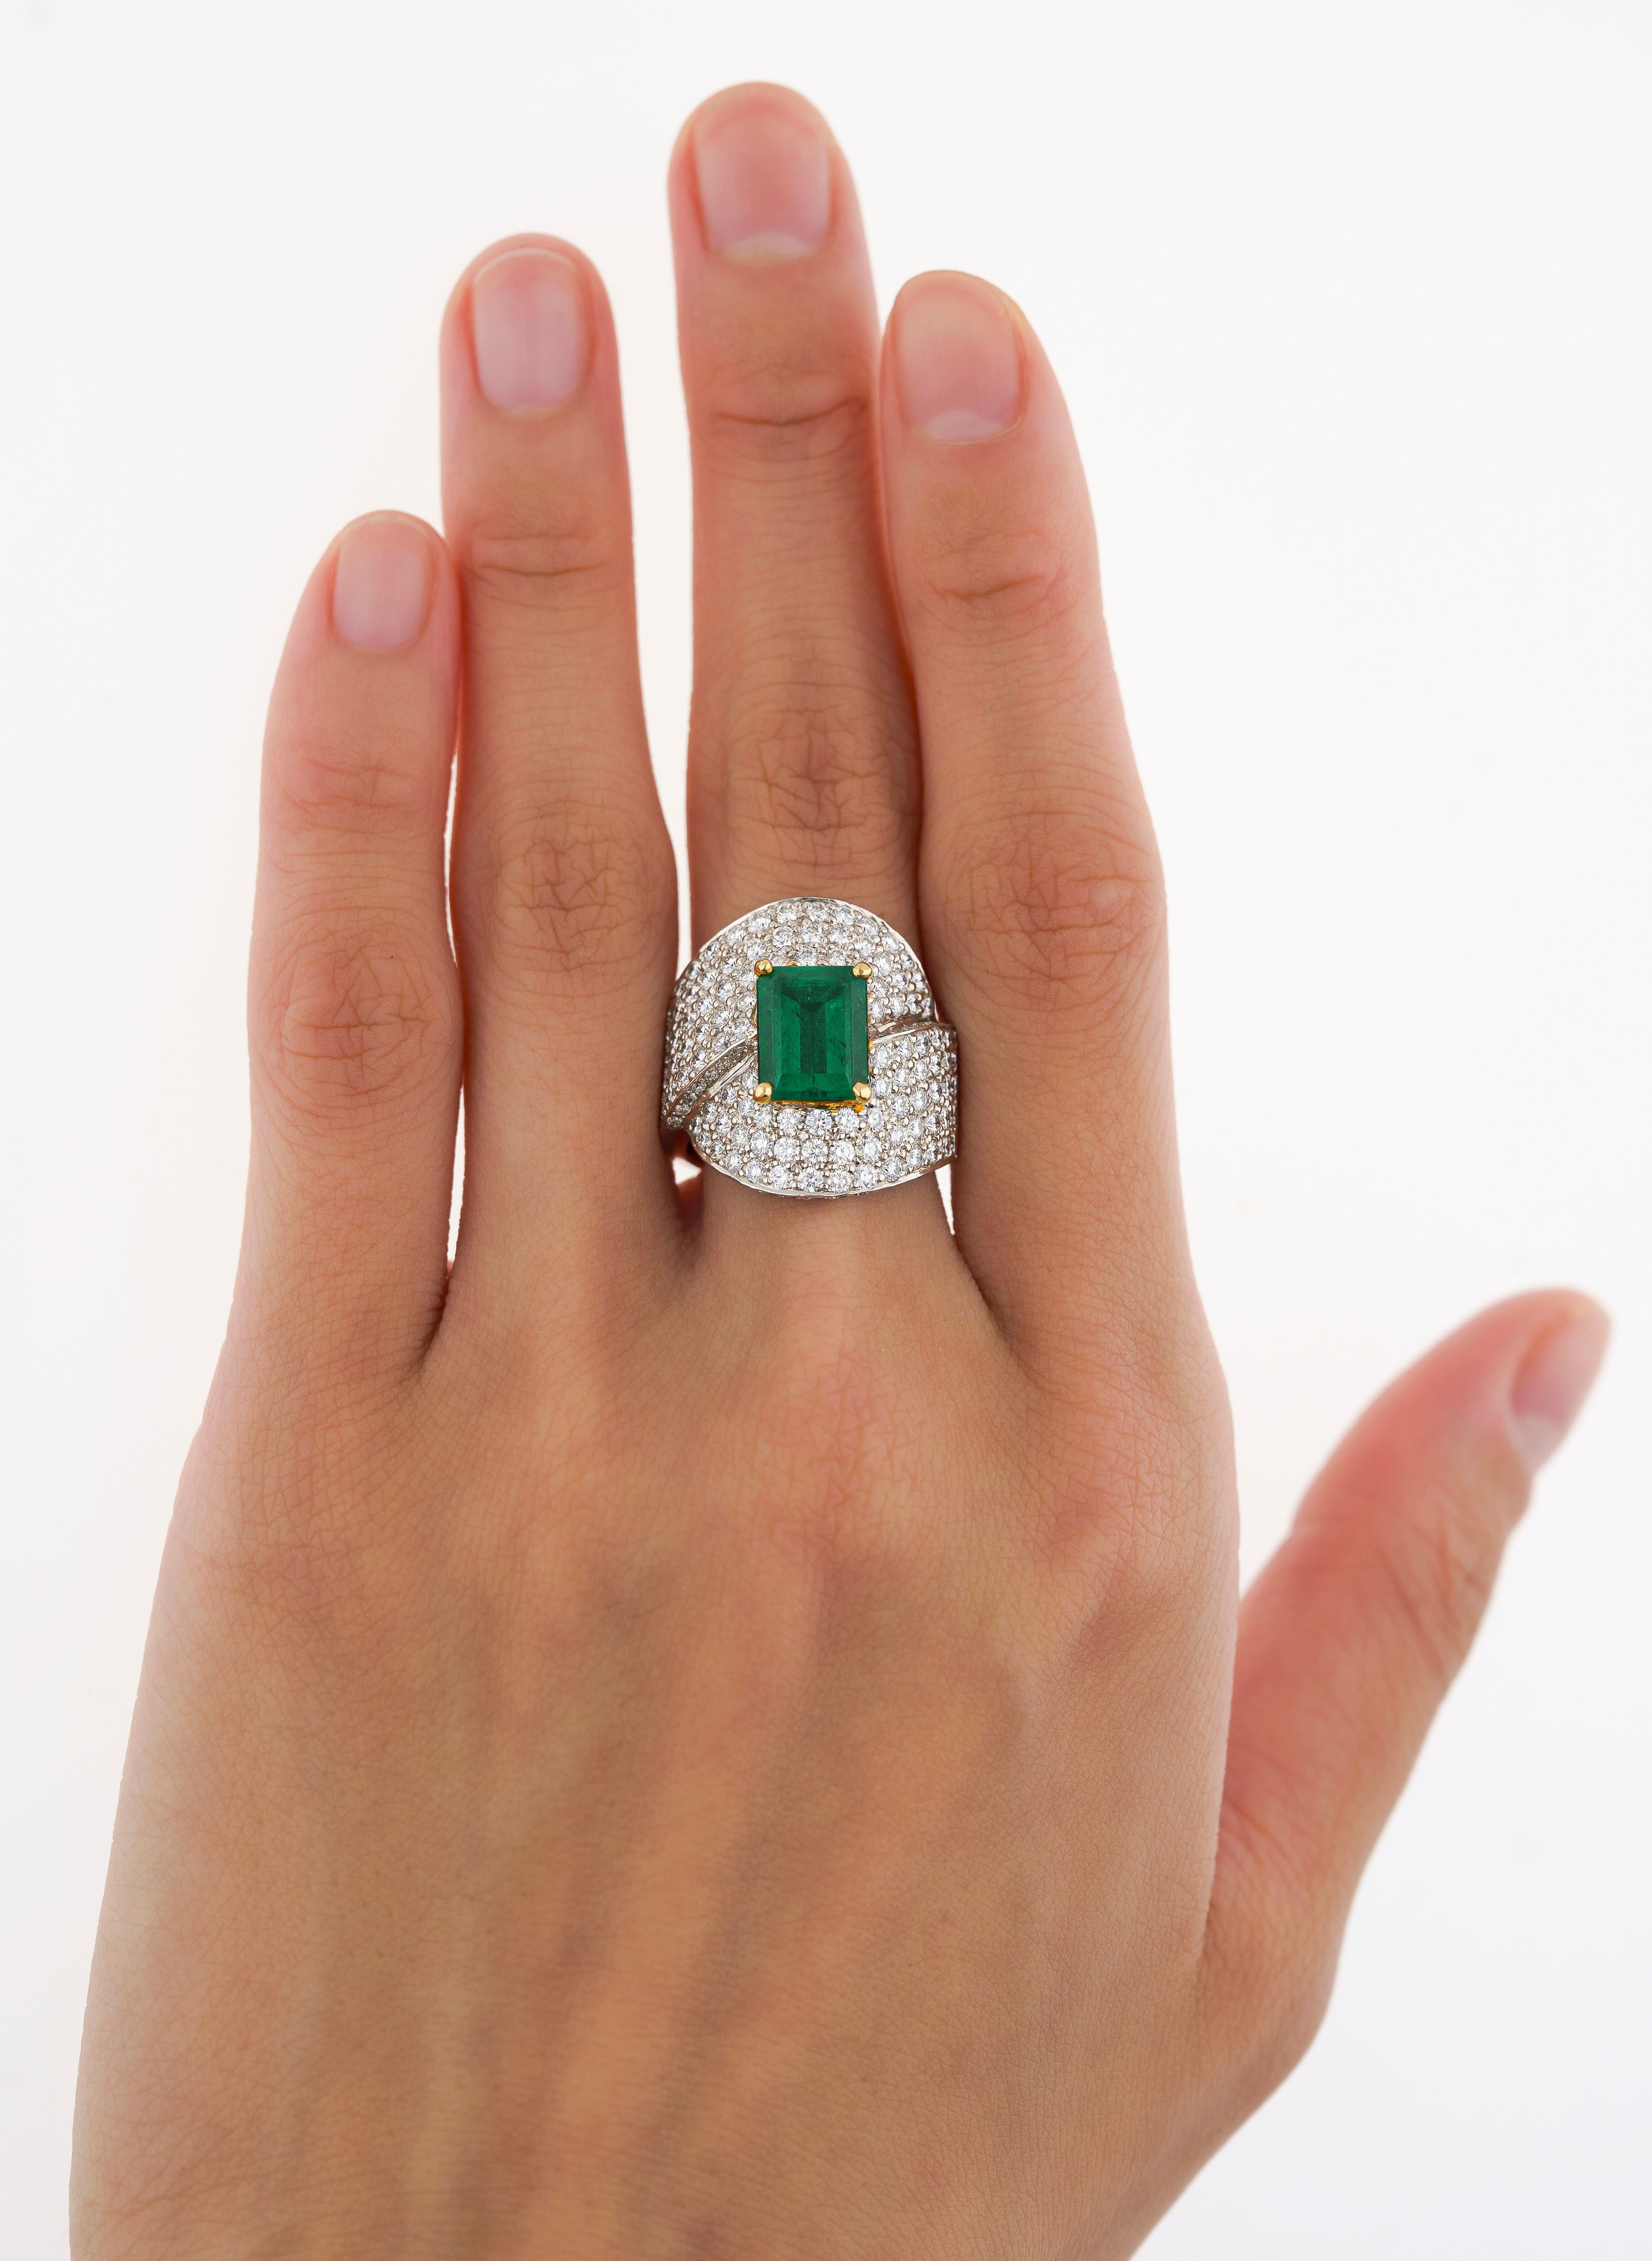 GRS Certified 2.53 Carat Vivid Green Colombian Minor Oil Emerald & Diamond Ring For Sale 1